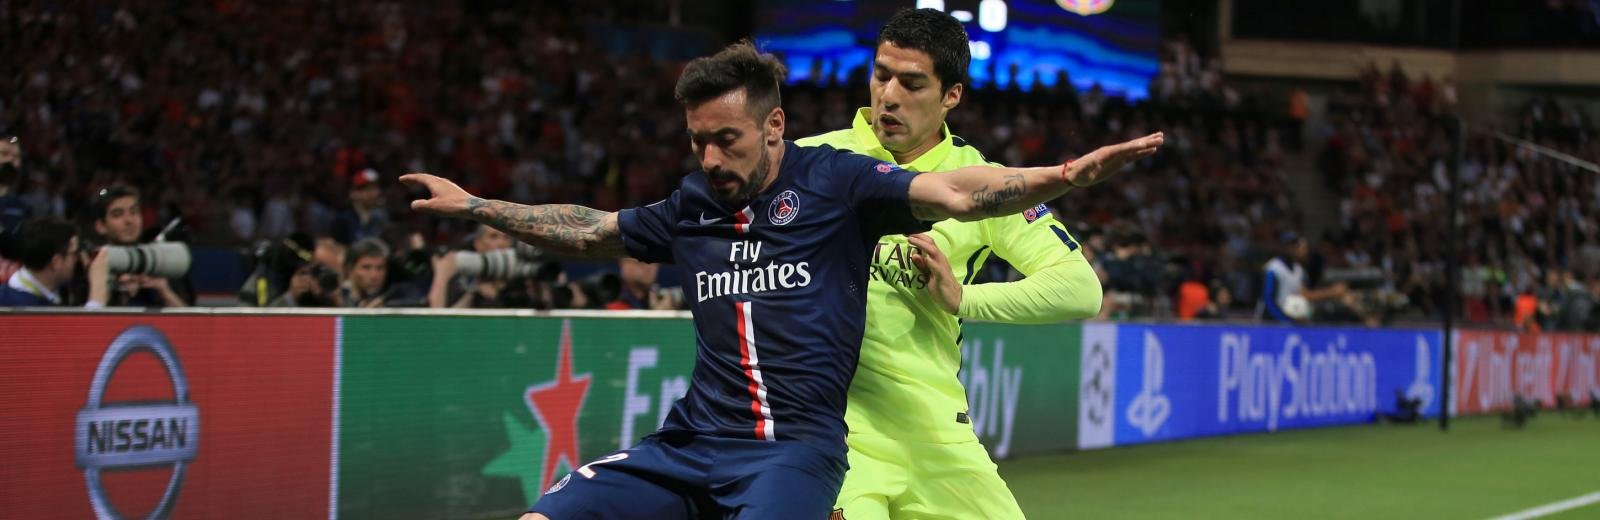 Chelsea keen on free deal for PSG’s former €30m star signing